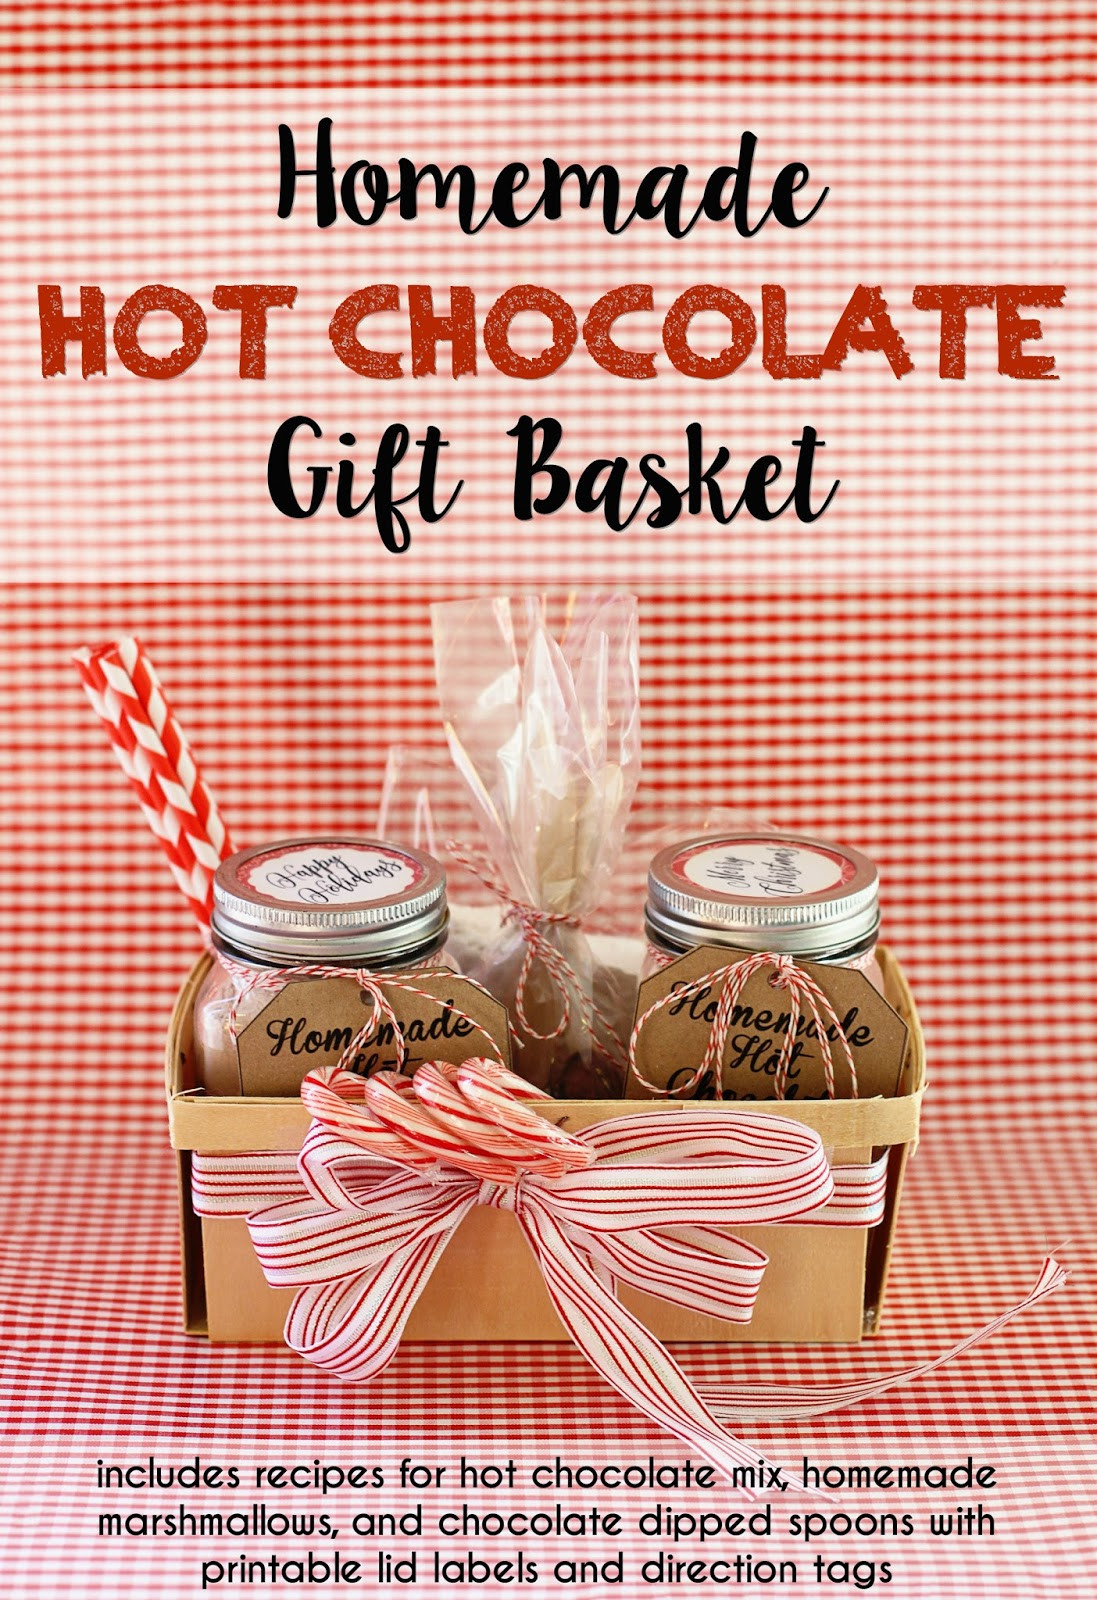 Top 10 Chocolate Gift Basket Ideas
 Running from the Law DIY Homemade Hot Chocolate Gift Basket